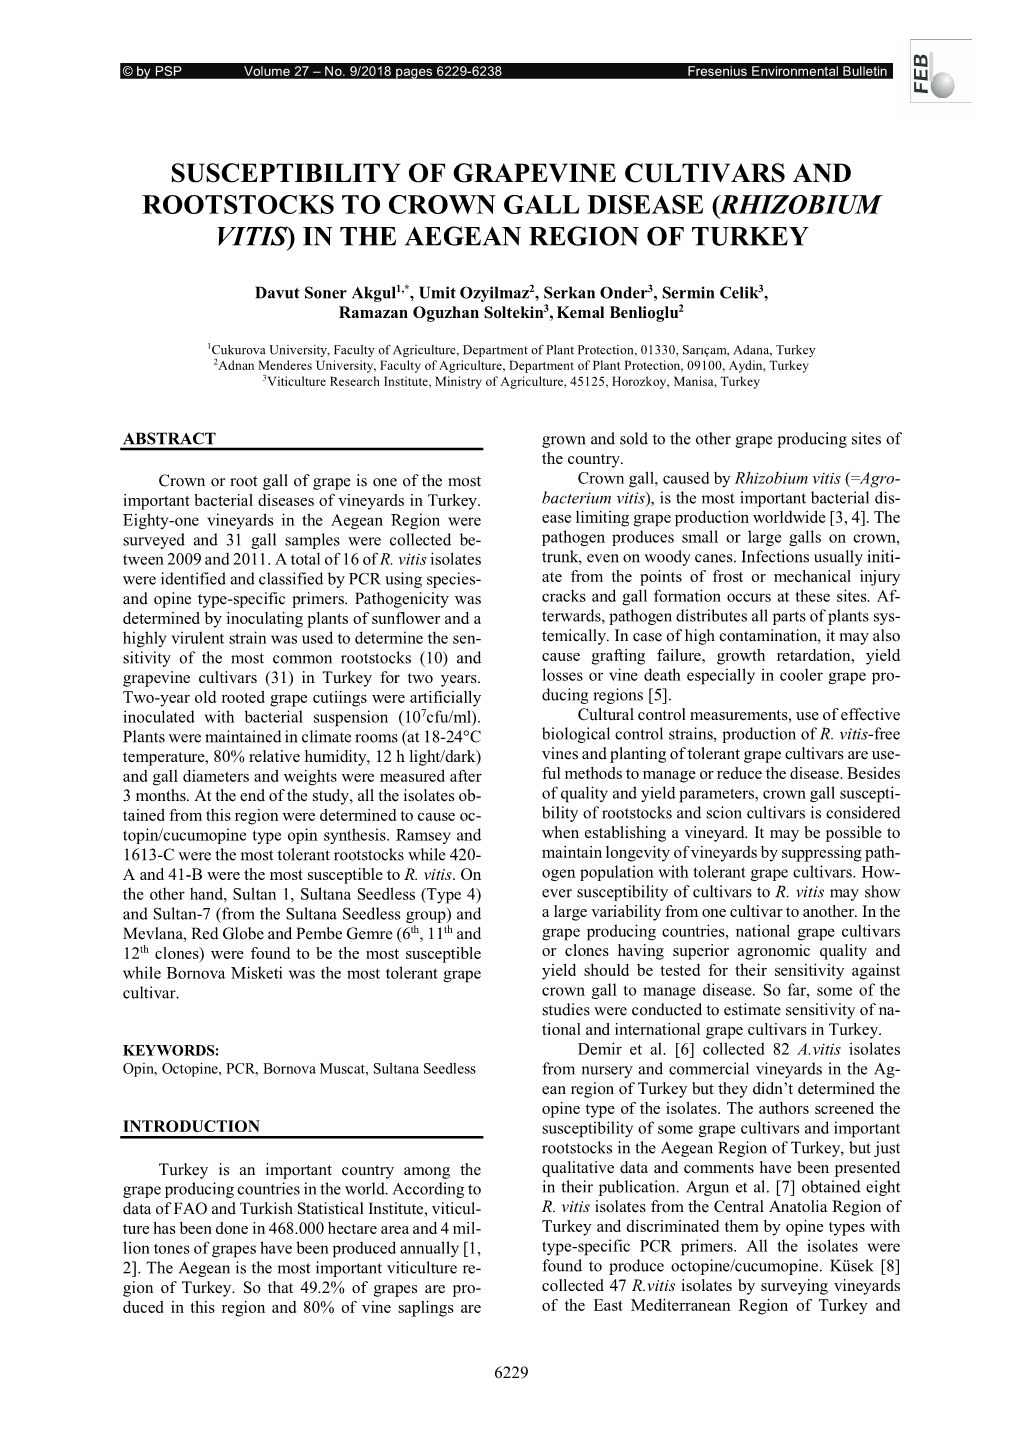 Susceptibility of Grapevine Cultivars and Rootstocks to Crown Gall Disease (Rhizobium Vitis) in the Aegean Region of Turkey